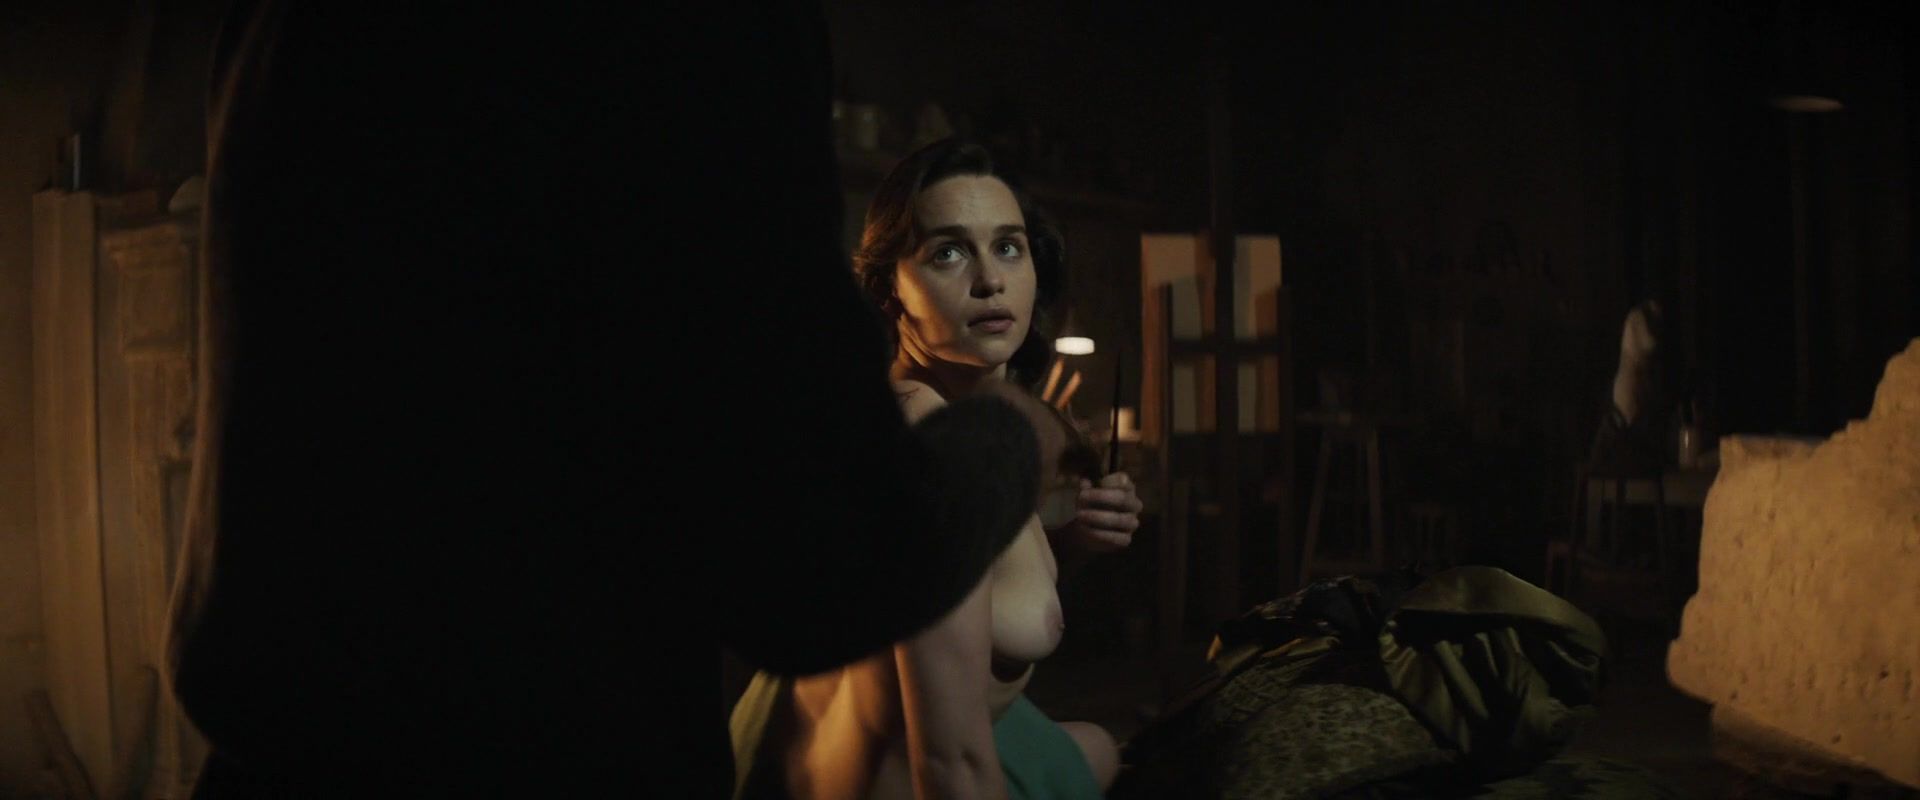 Free Blowjob Naked Emilia Clarke in topless scene of the movie "Voice from the Stone" | Released in 2017 Rubbing